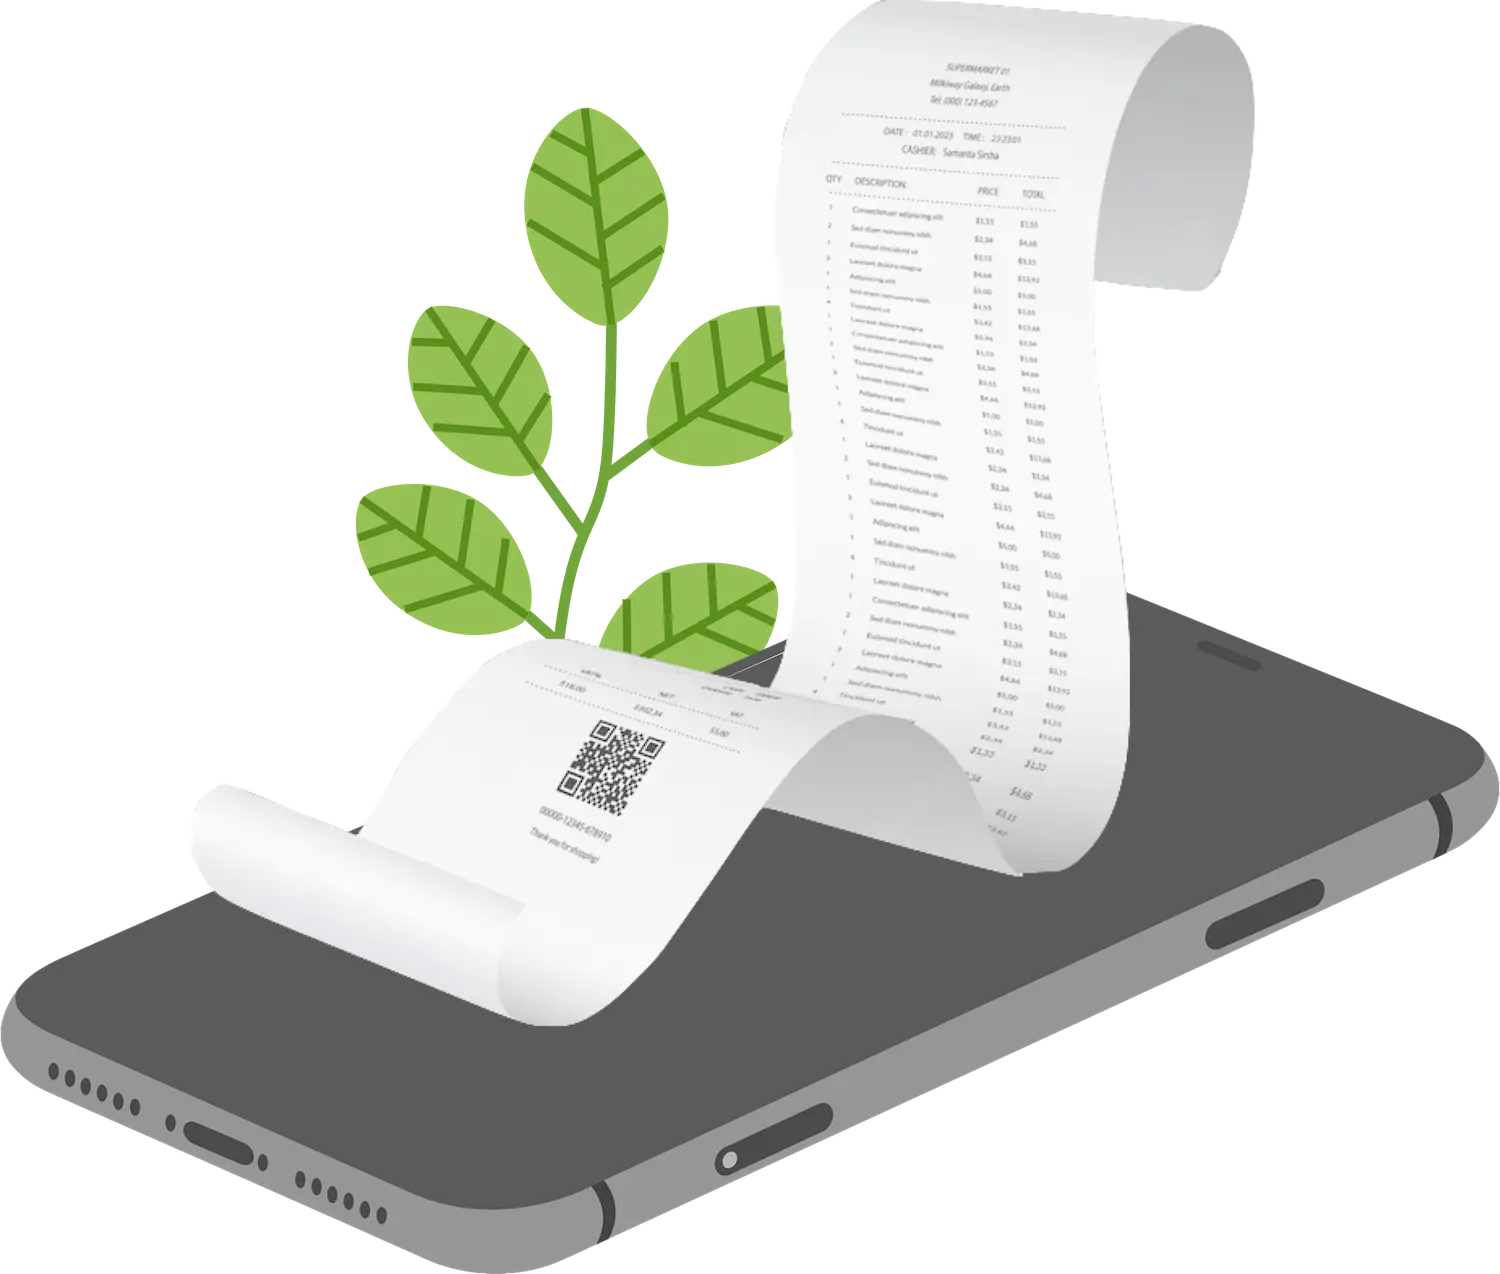 Receipt-AI: The image shows an illustrated smartphone lying flat with a paper receipt rolling out of its screen, suggesting a transition from the physical to the digital. The receipt is long and detailed, with a QR code on the top right side, indicating modern transaction methods. Behind the receipt, a green plant with three leaves is sprouting from the base of the screen, symbolizing growth or eco-friendliness.